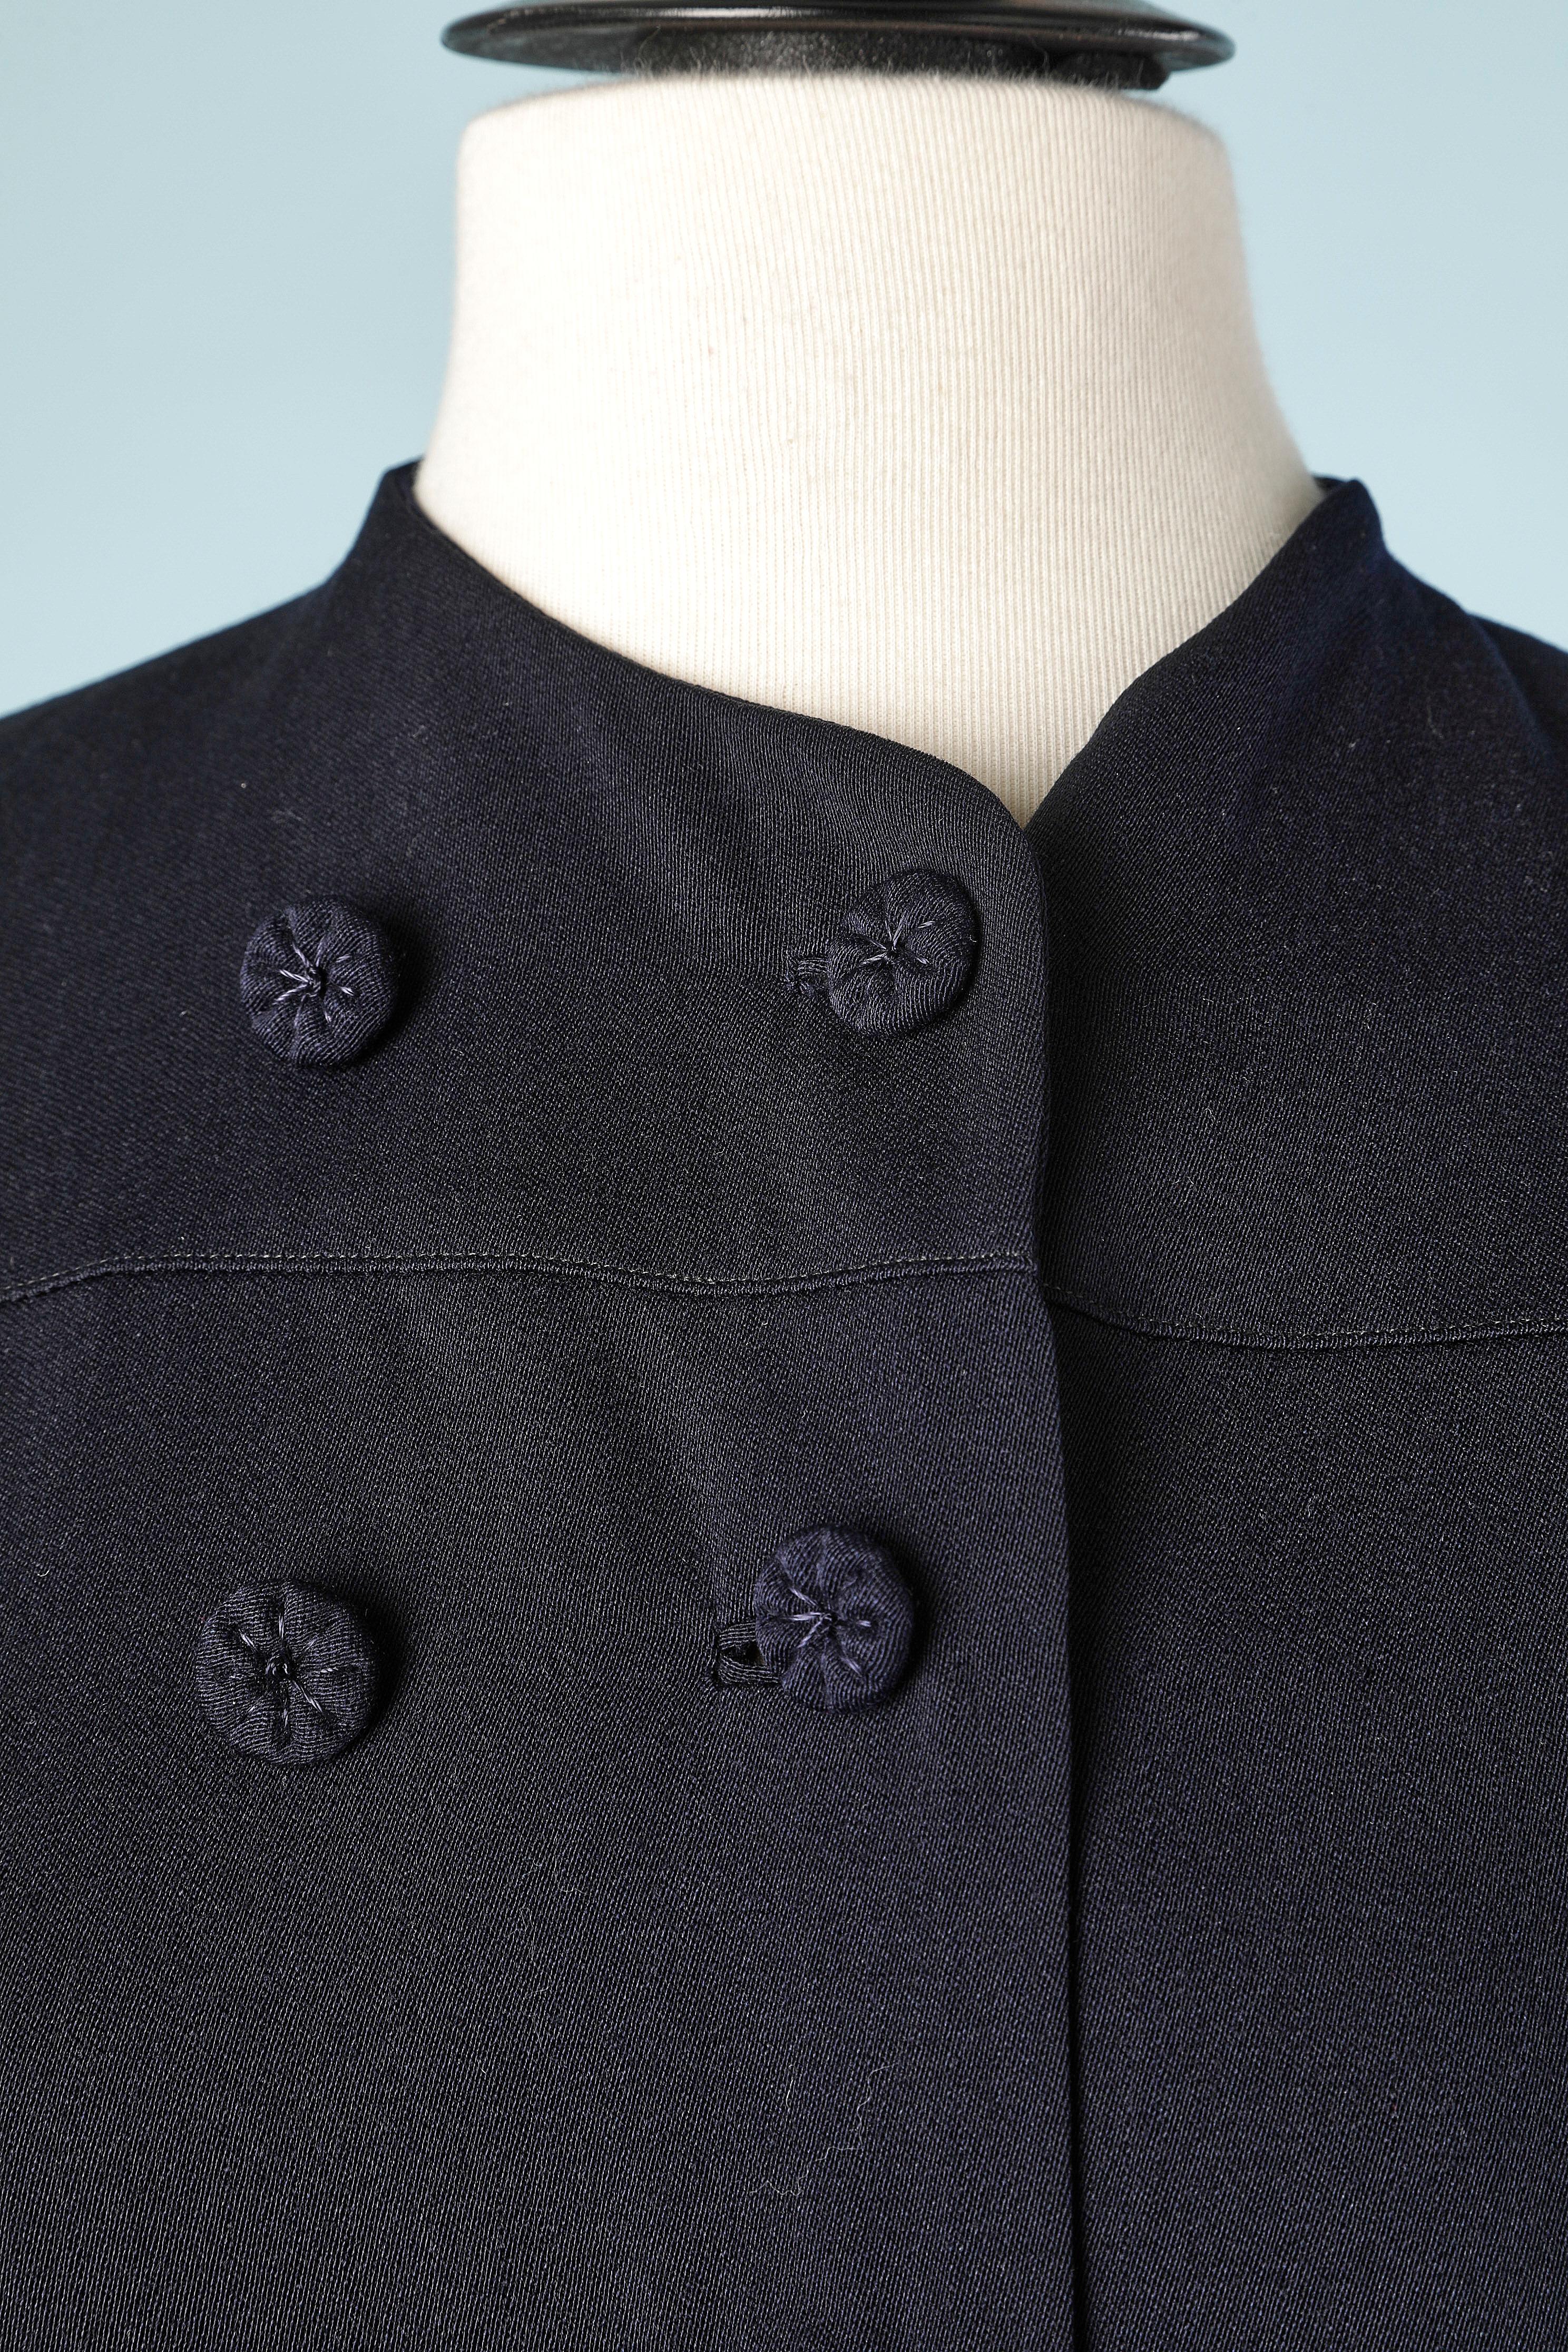 Double-breasted wool coat with pleated sleeves.Cape effect. Silk lining. Fabric covered buttons. Size L 